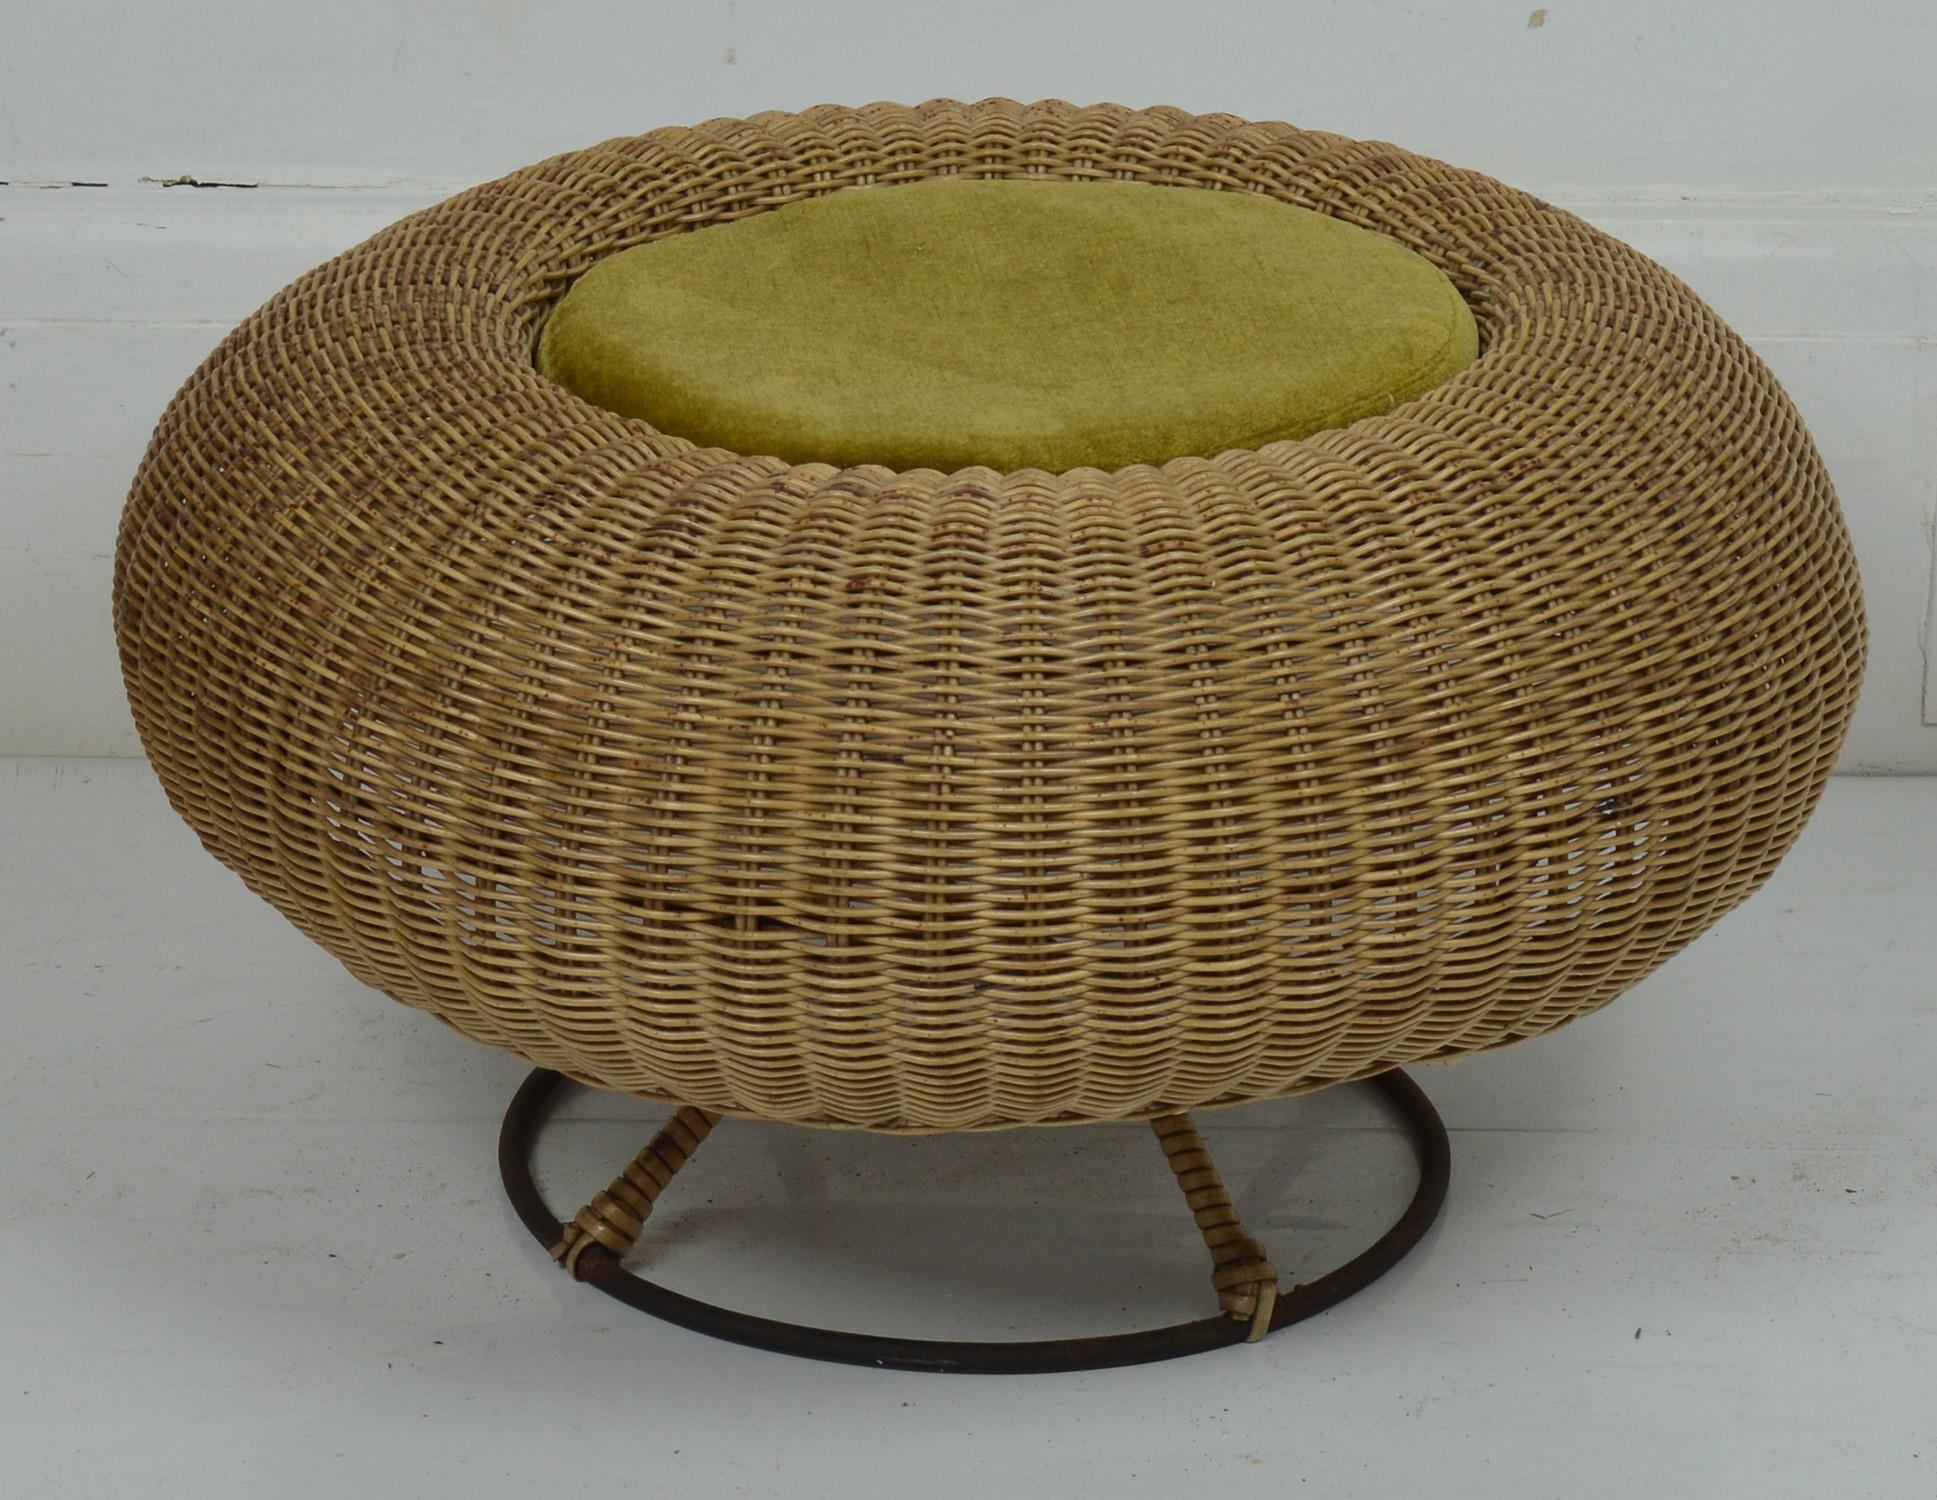 Wonderful iconic statement piece of furniture.

Rattan on a metal stand.

Very versatile. It can be a stool or a coffee table.

Designer unknown. Probably Italian.

Light but sturdy.